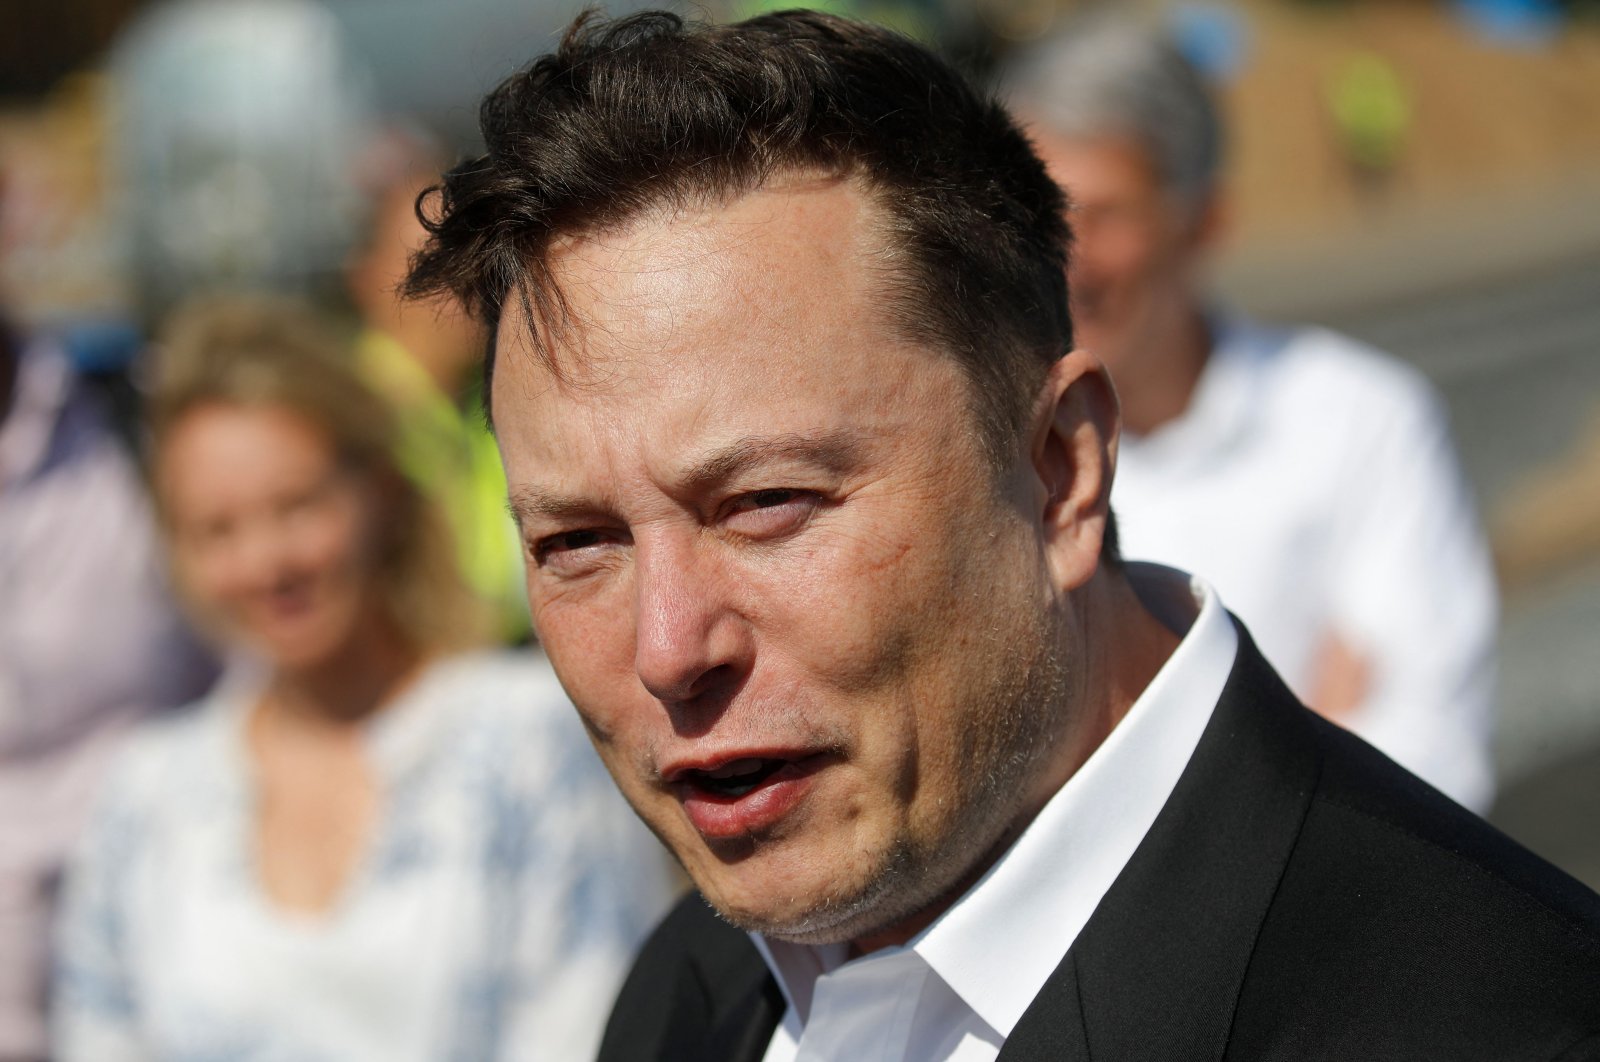 Tesla CEO Elon Musk talks to media as he arrives to visit the construction site of the future U.S. electric car giant Tesla, in Gruenheide near Berlin, Germany, Sept. 3, 2020. (AFP Photo)